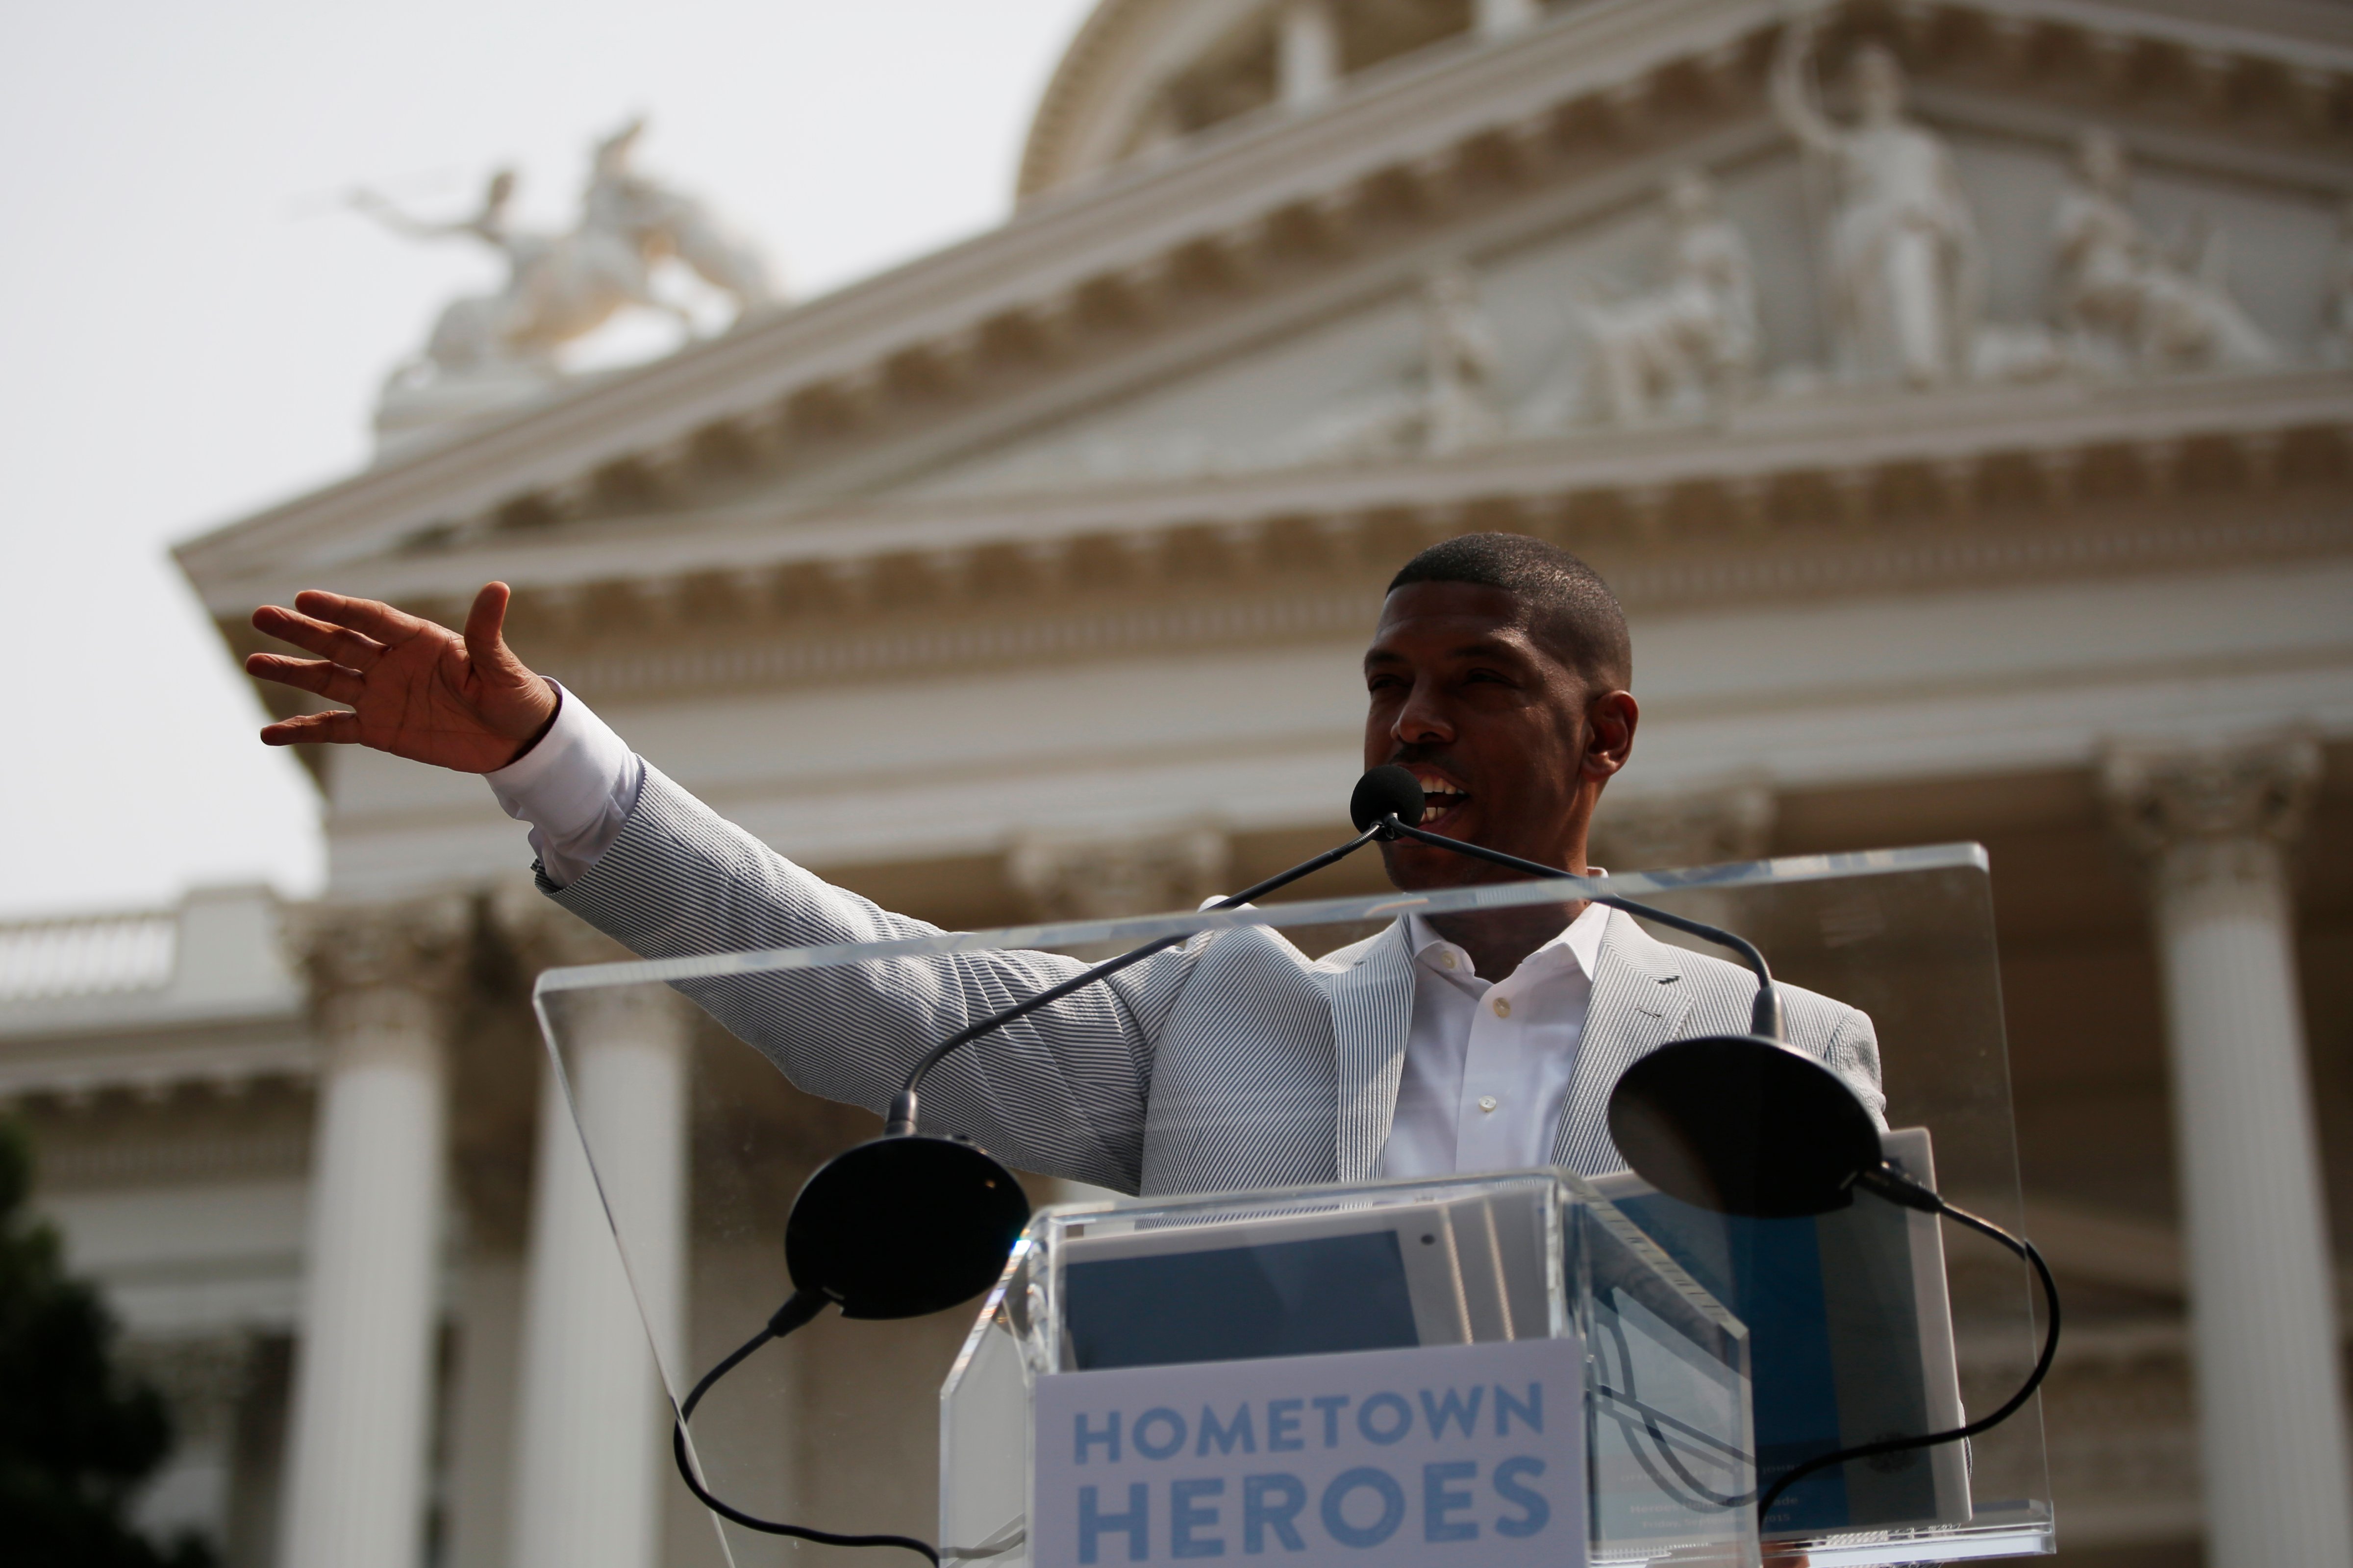 Sacramento Mayor Kevin Johnson speaks on stage during a parade on Sept. 11, 2015 in Sacramento, California. (Stephen Lam—Getty Images)